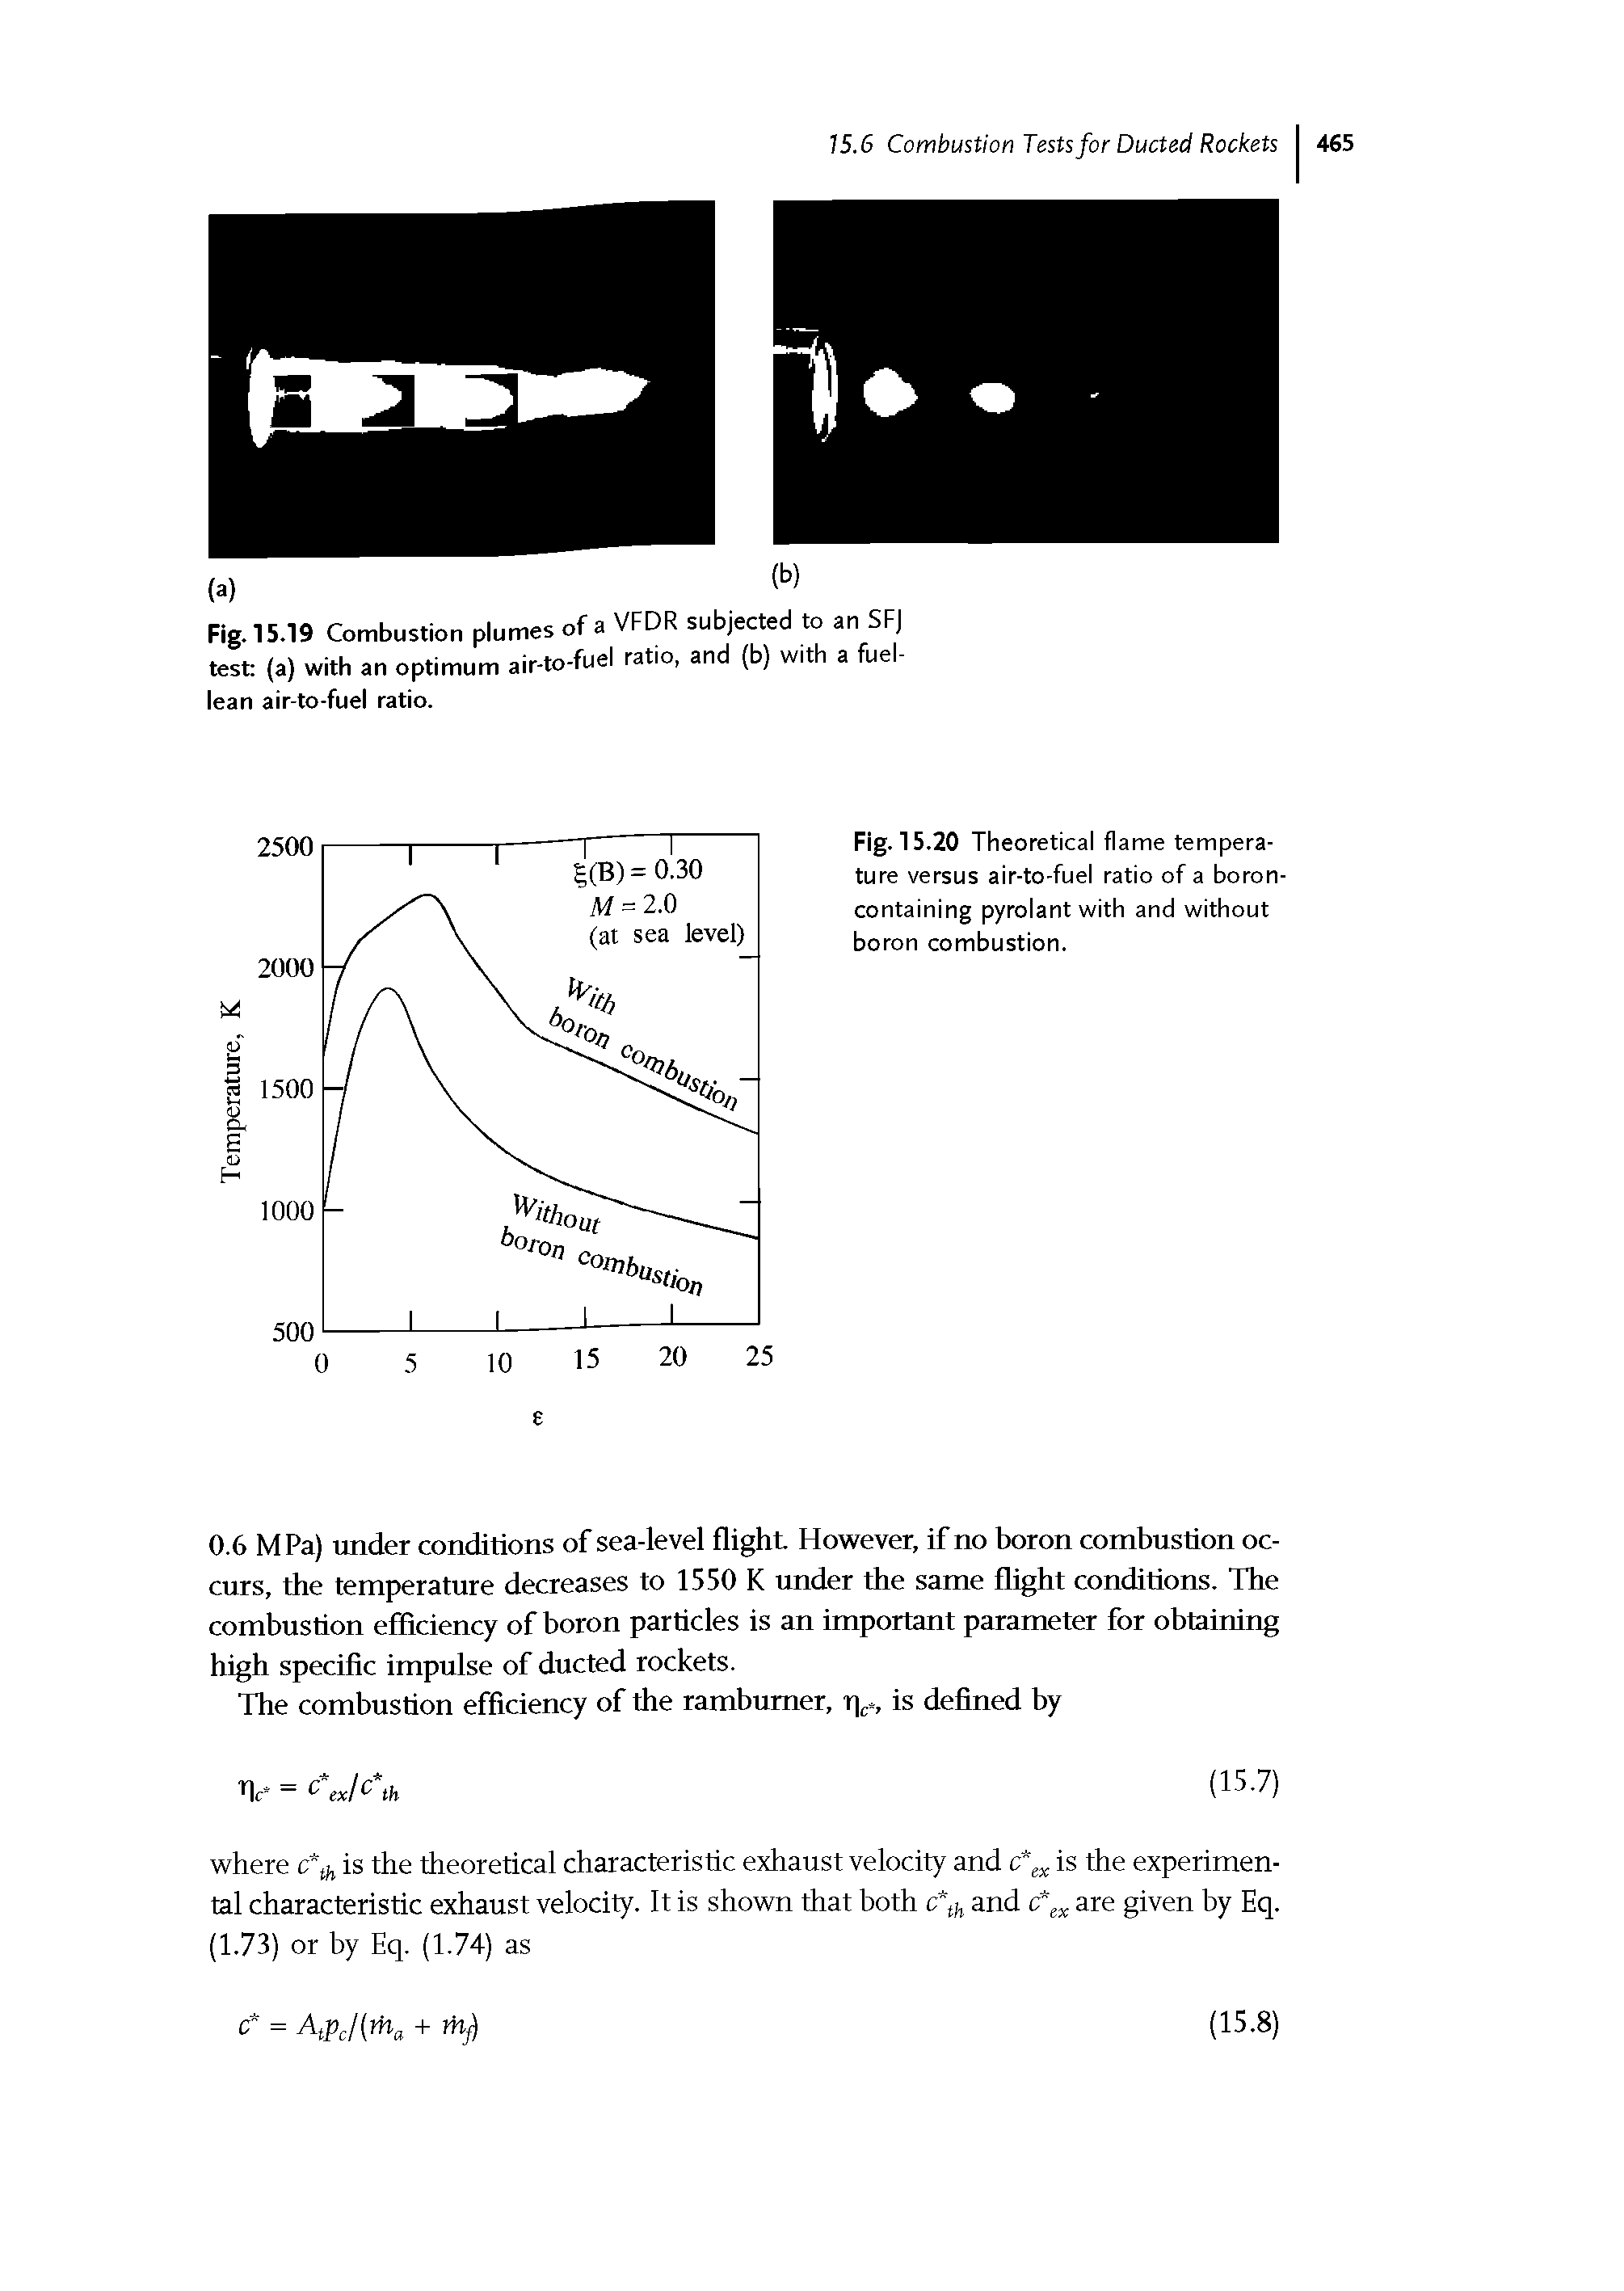 Fig. 15.19 Combustion plumes of a VFDR subjected to an SF] test (a) with an optimum air-to-fuel ratio, and (b) with a fuel-lean air-to-fuel ratio.